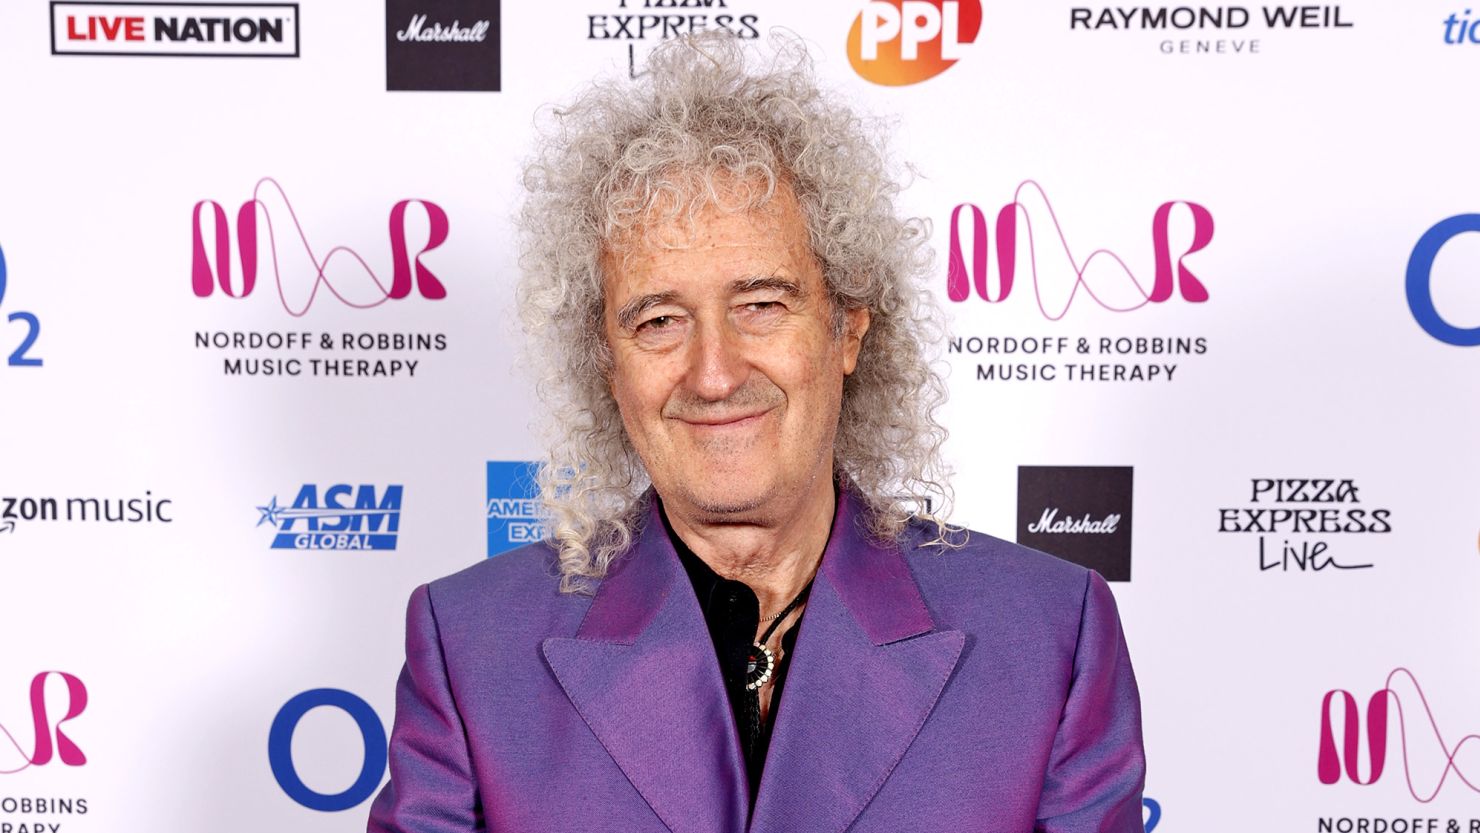 The Queen guitarist and astrophysicist was part of a NASA team bringing an asteroid sample back to Earth.